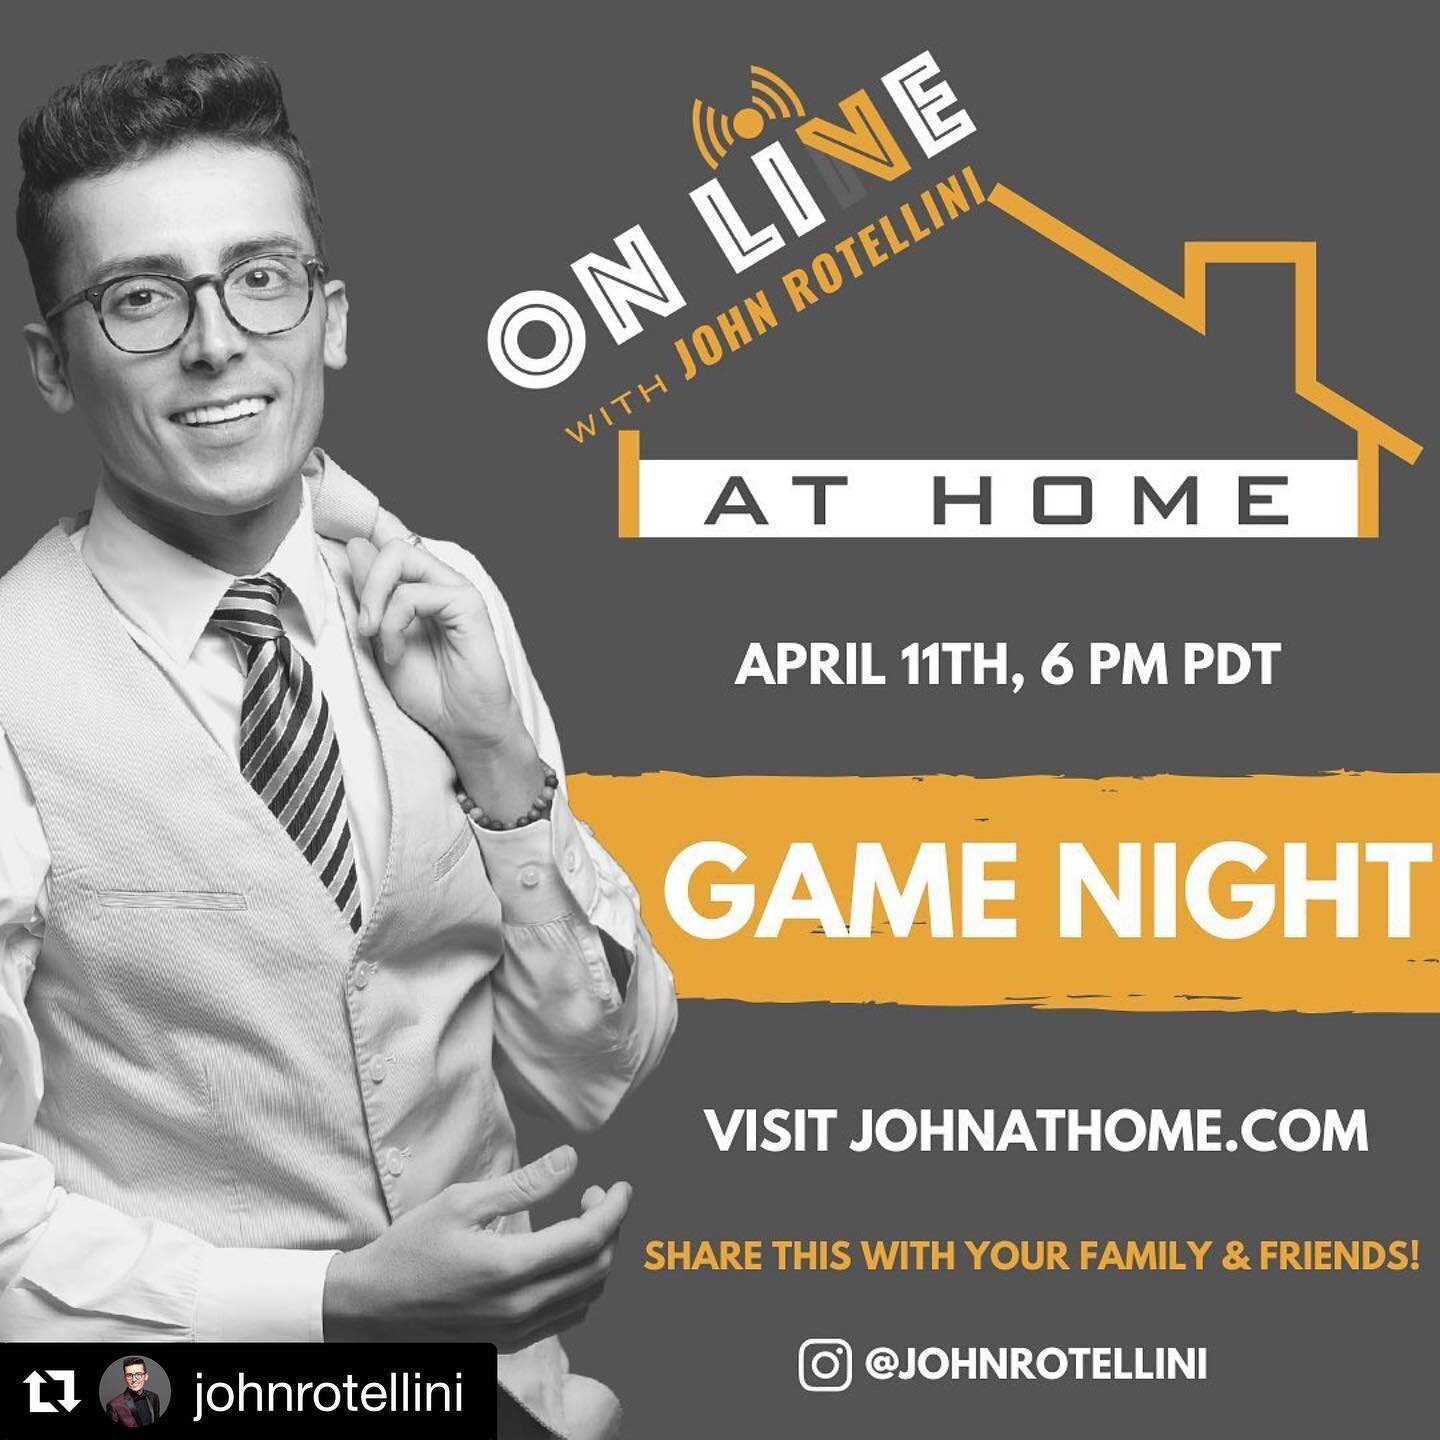 #Repost @johnrotellini
・・・
Hey friends!
I&rsquo;ve been helping some great organizations go virtual and stay connected during social distancing. With that in mind, I wanted to find some fun ways to connect with all of you. So, I hope you&rsquo;ll joi